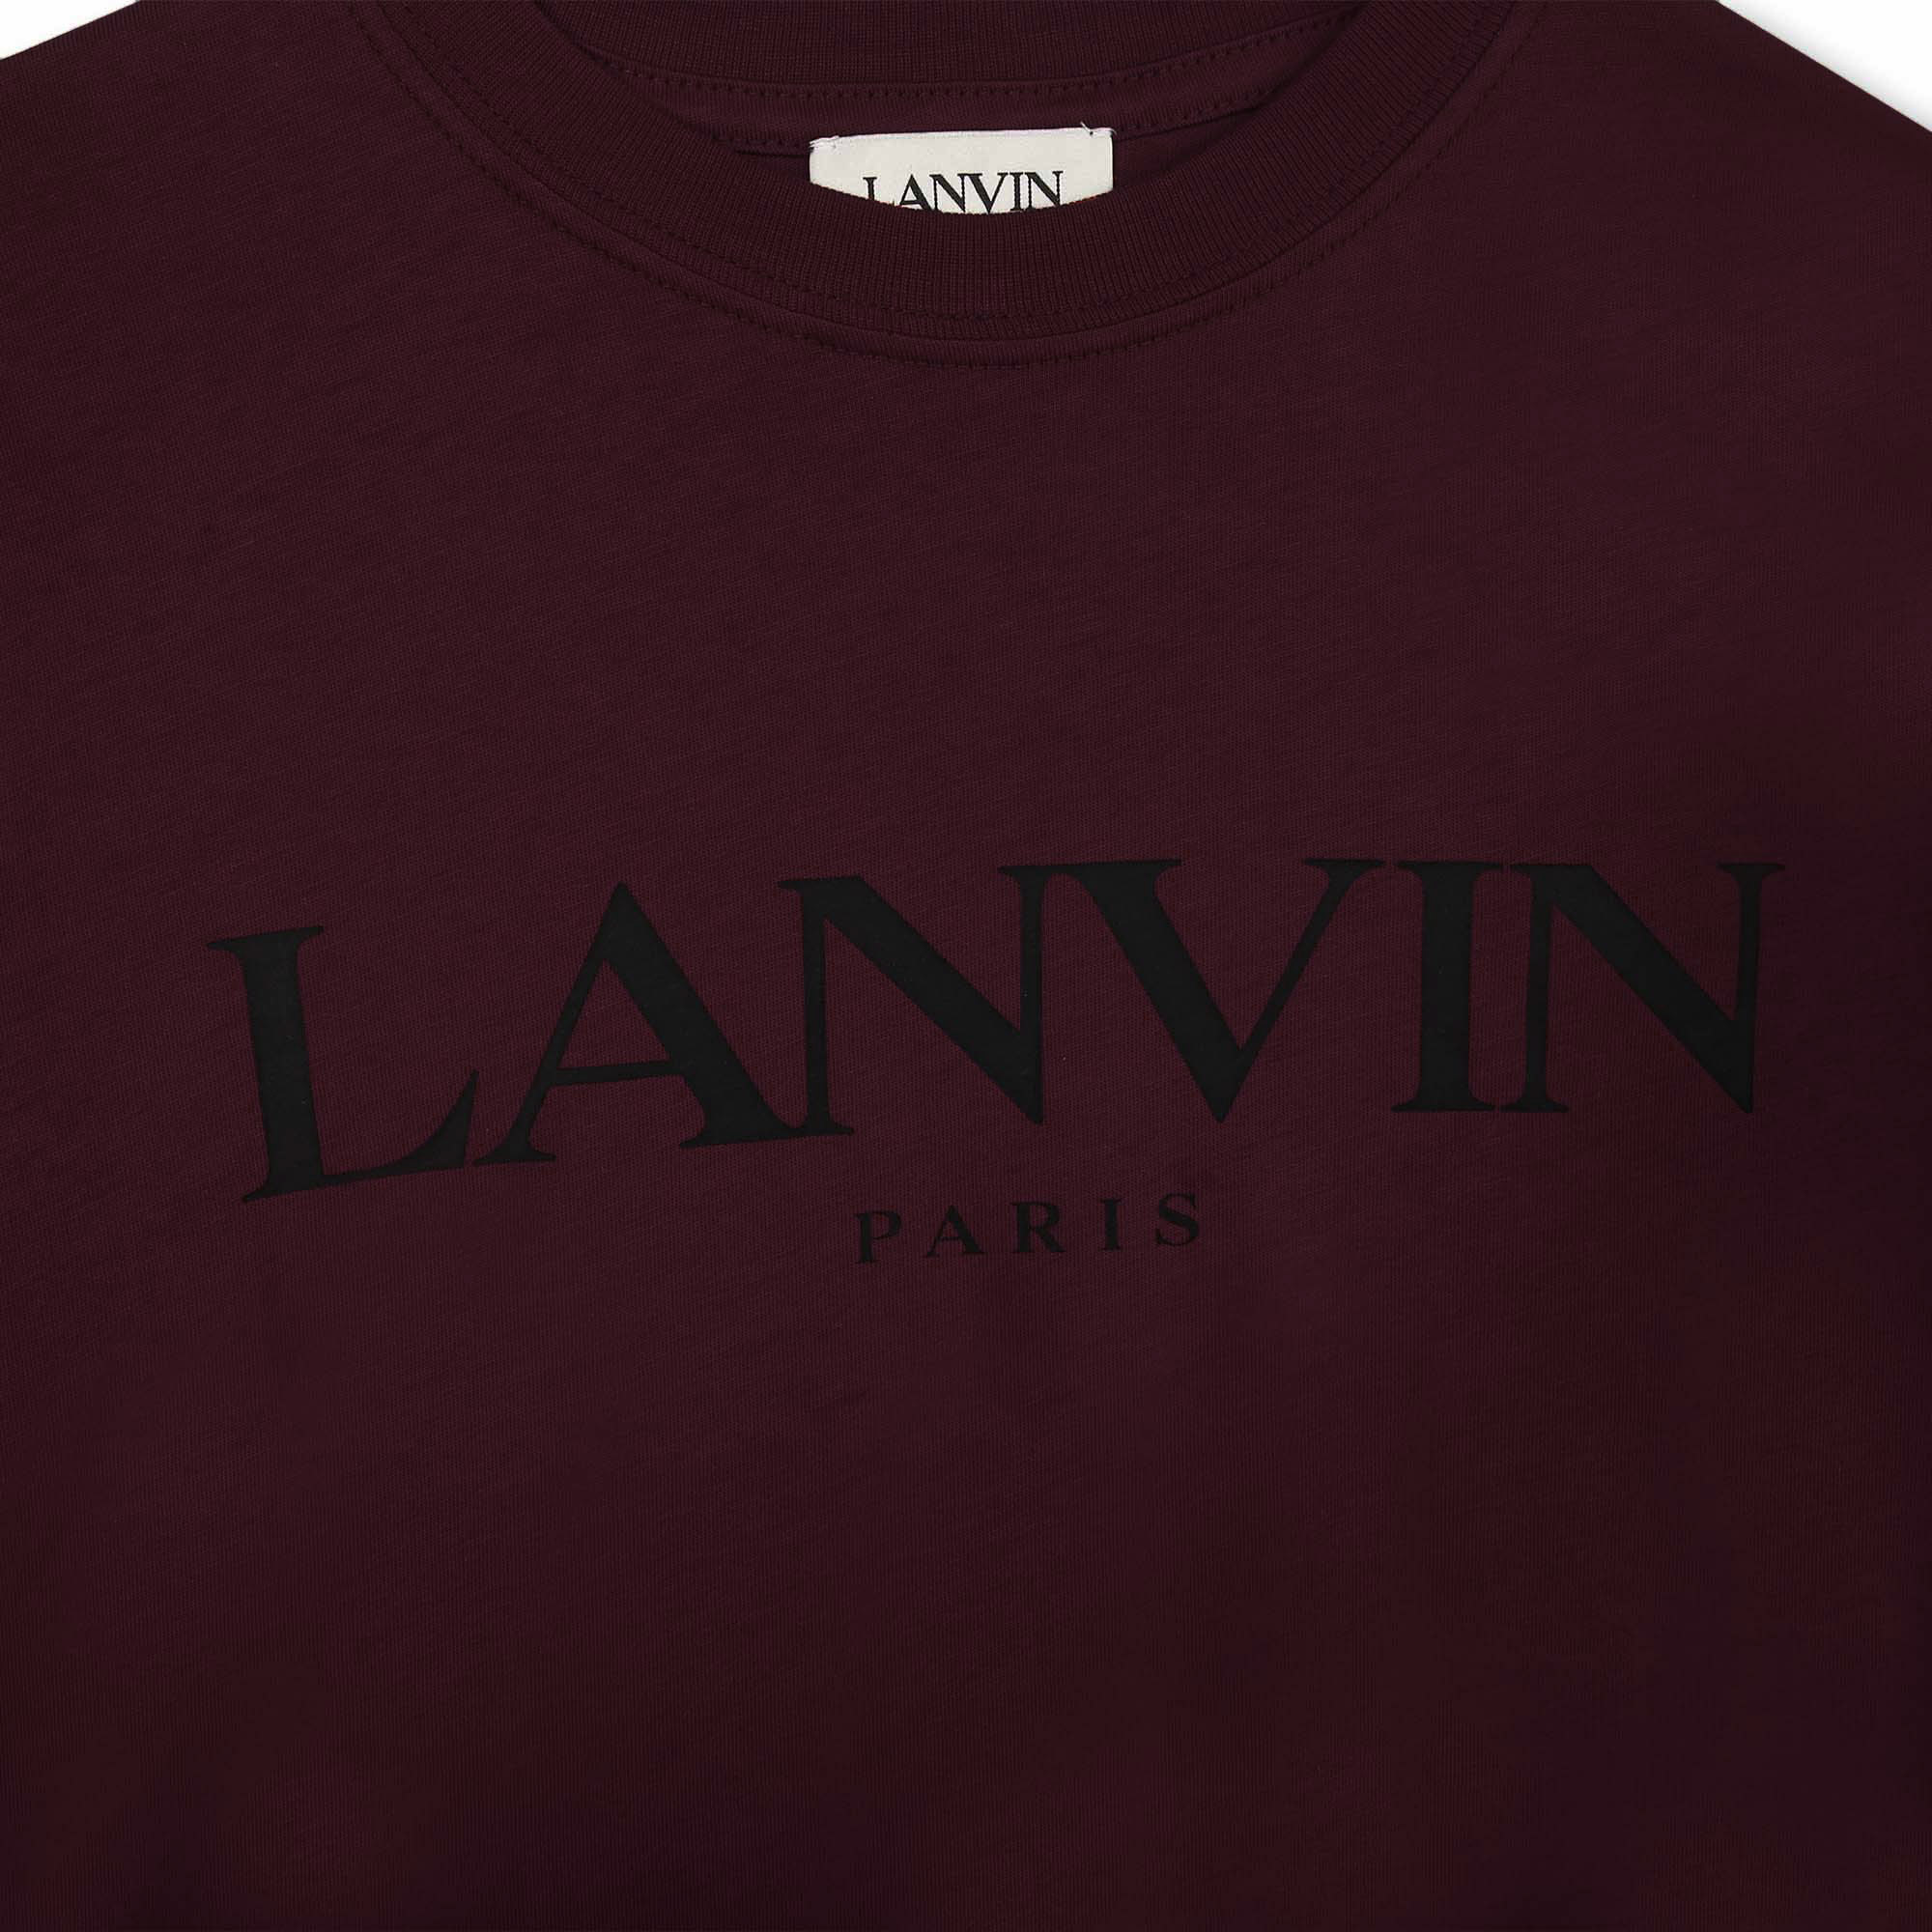 T-shirt with printed logo LANVIN for BOY